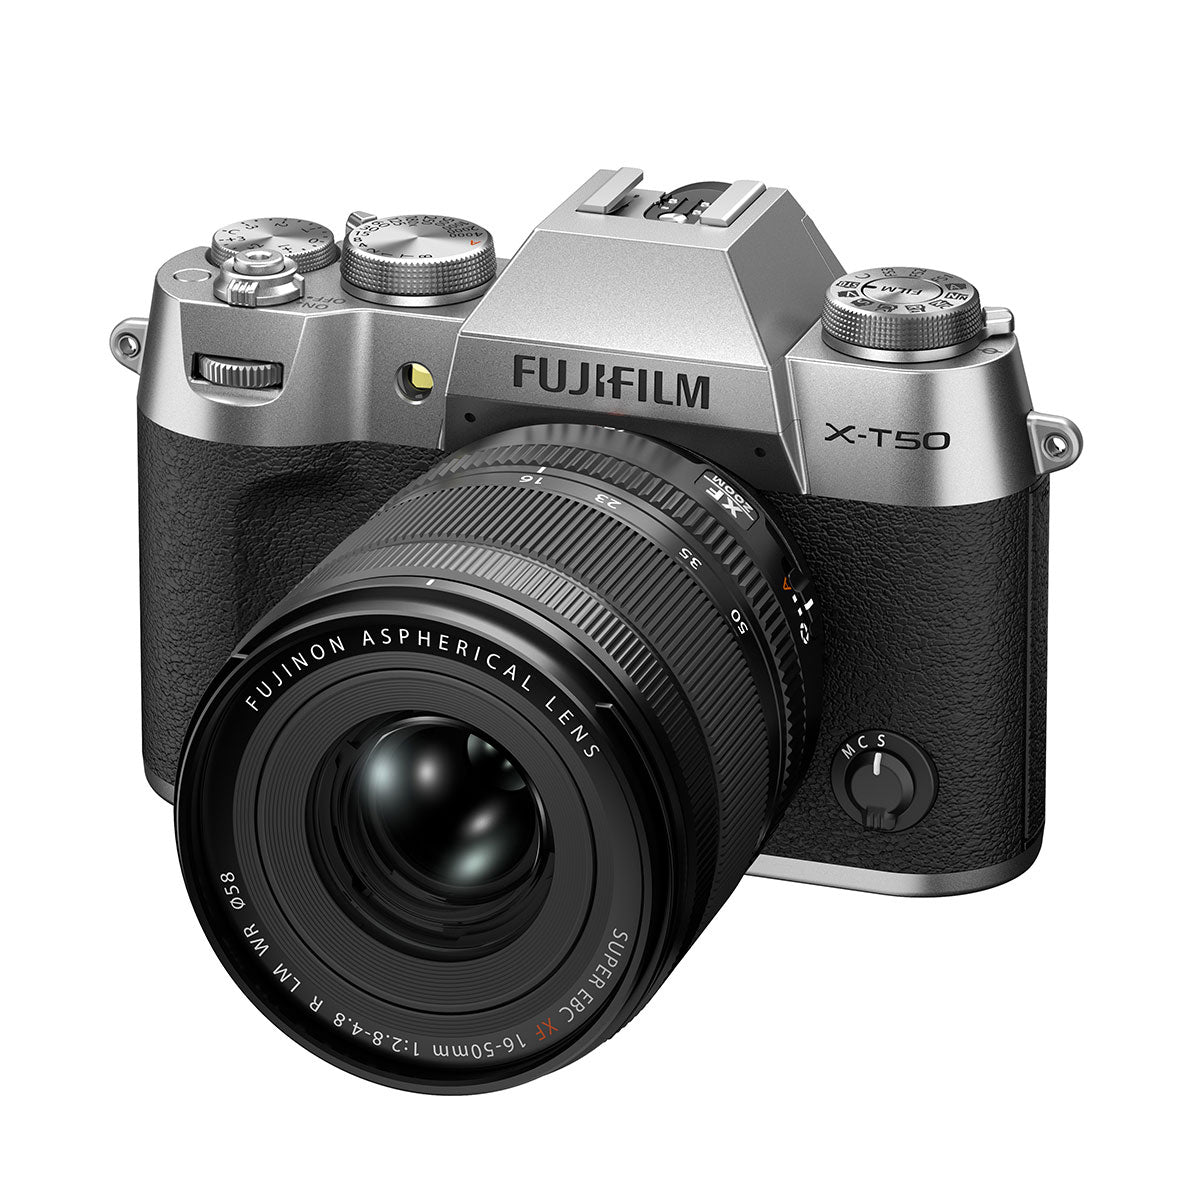 Fujifilm X-T50 Mirrorless Camera with 16-50mm Lens (Silver)